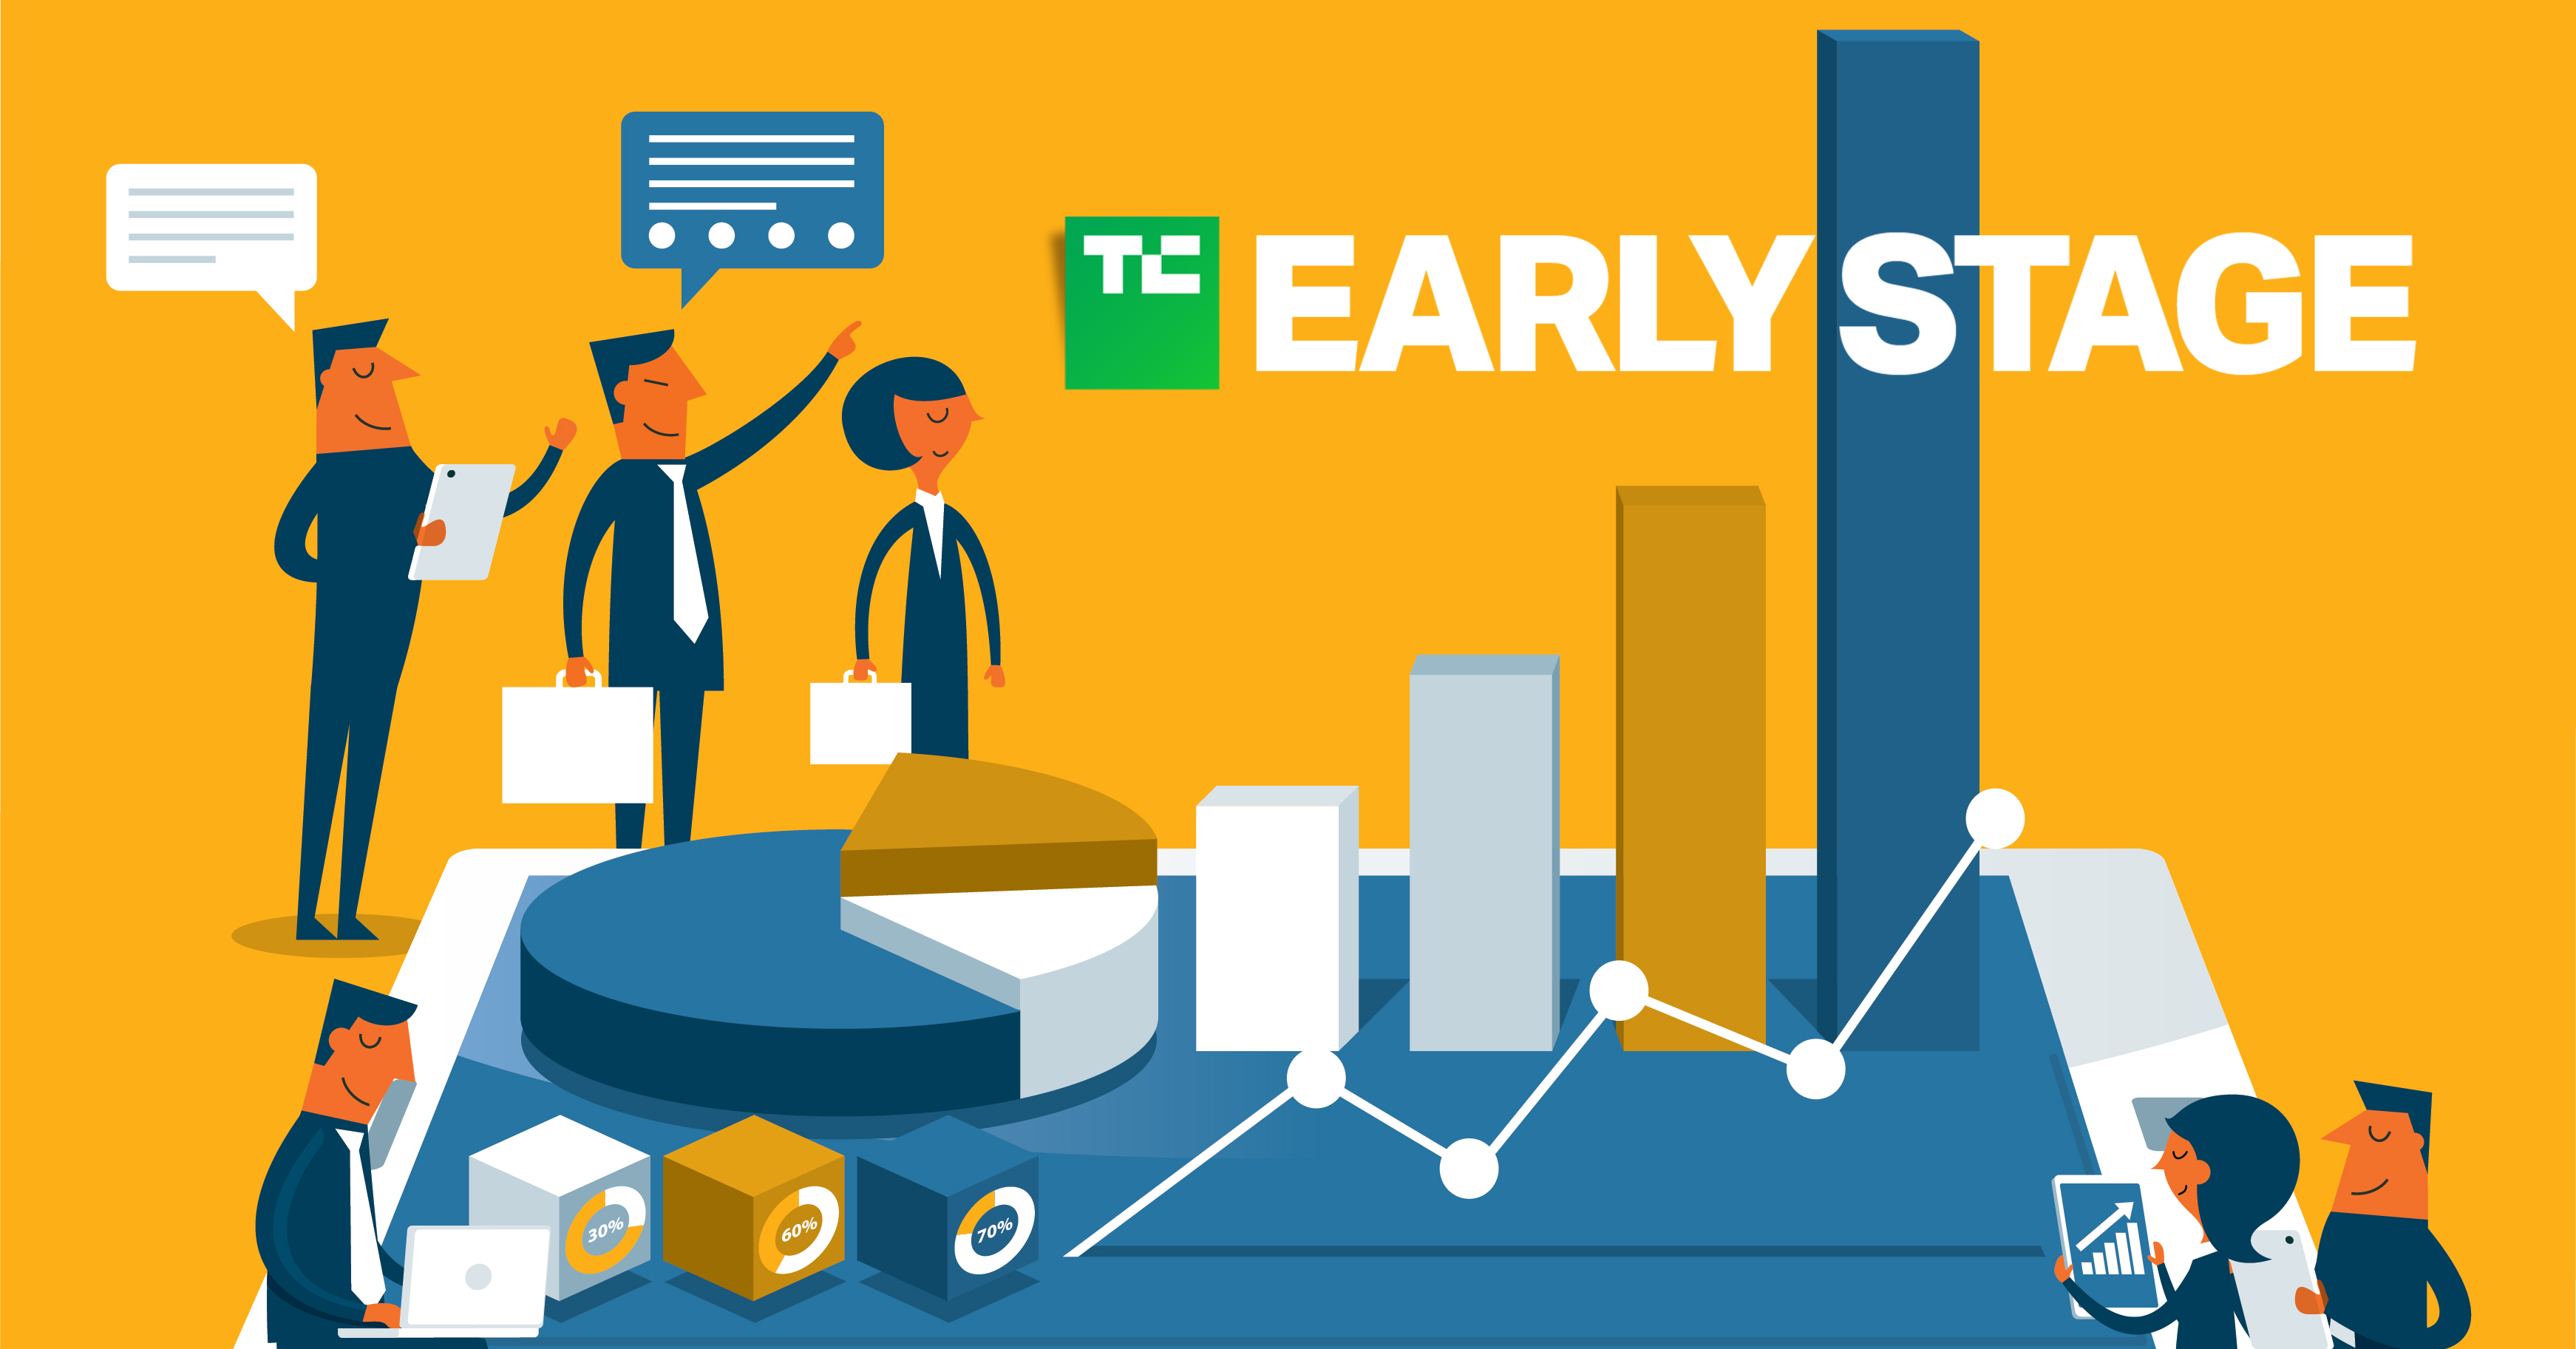 Announcing the startups pitching at TC Early Stage